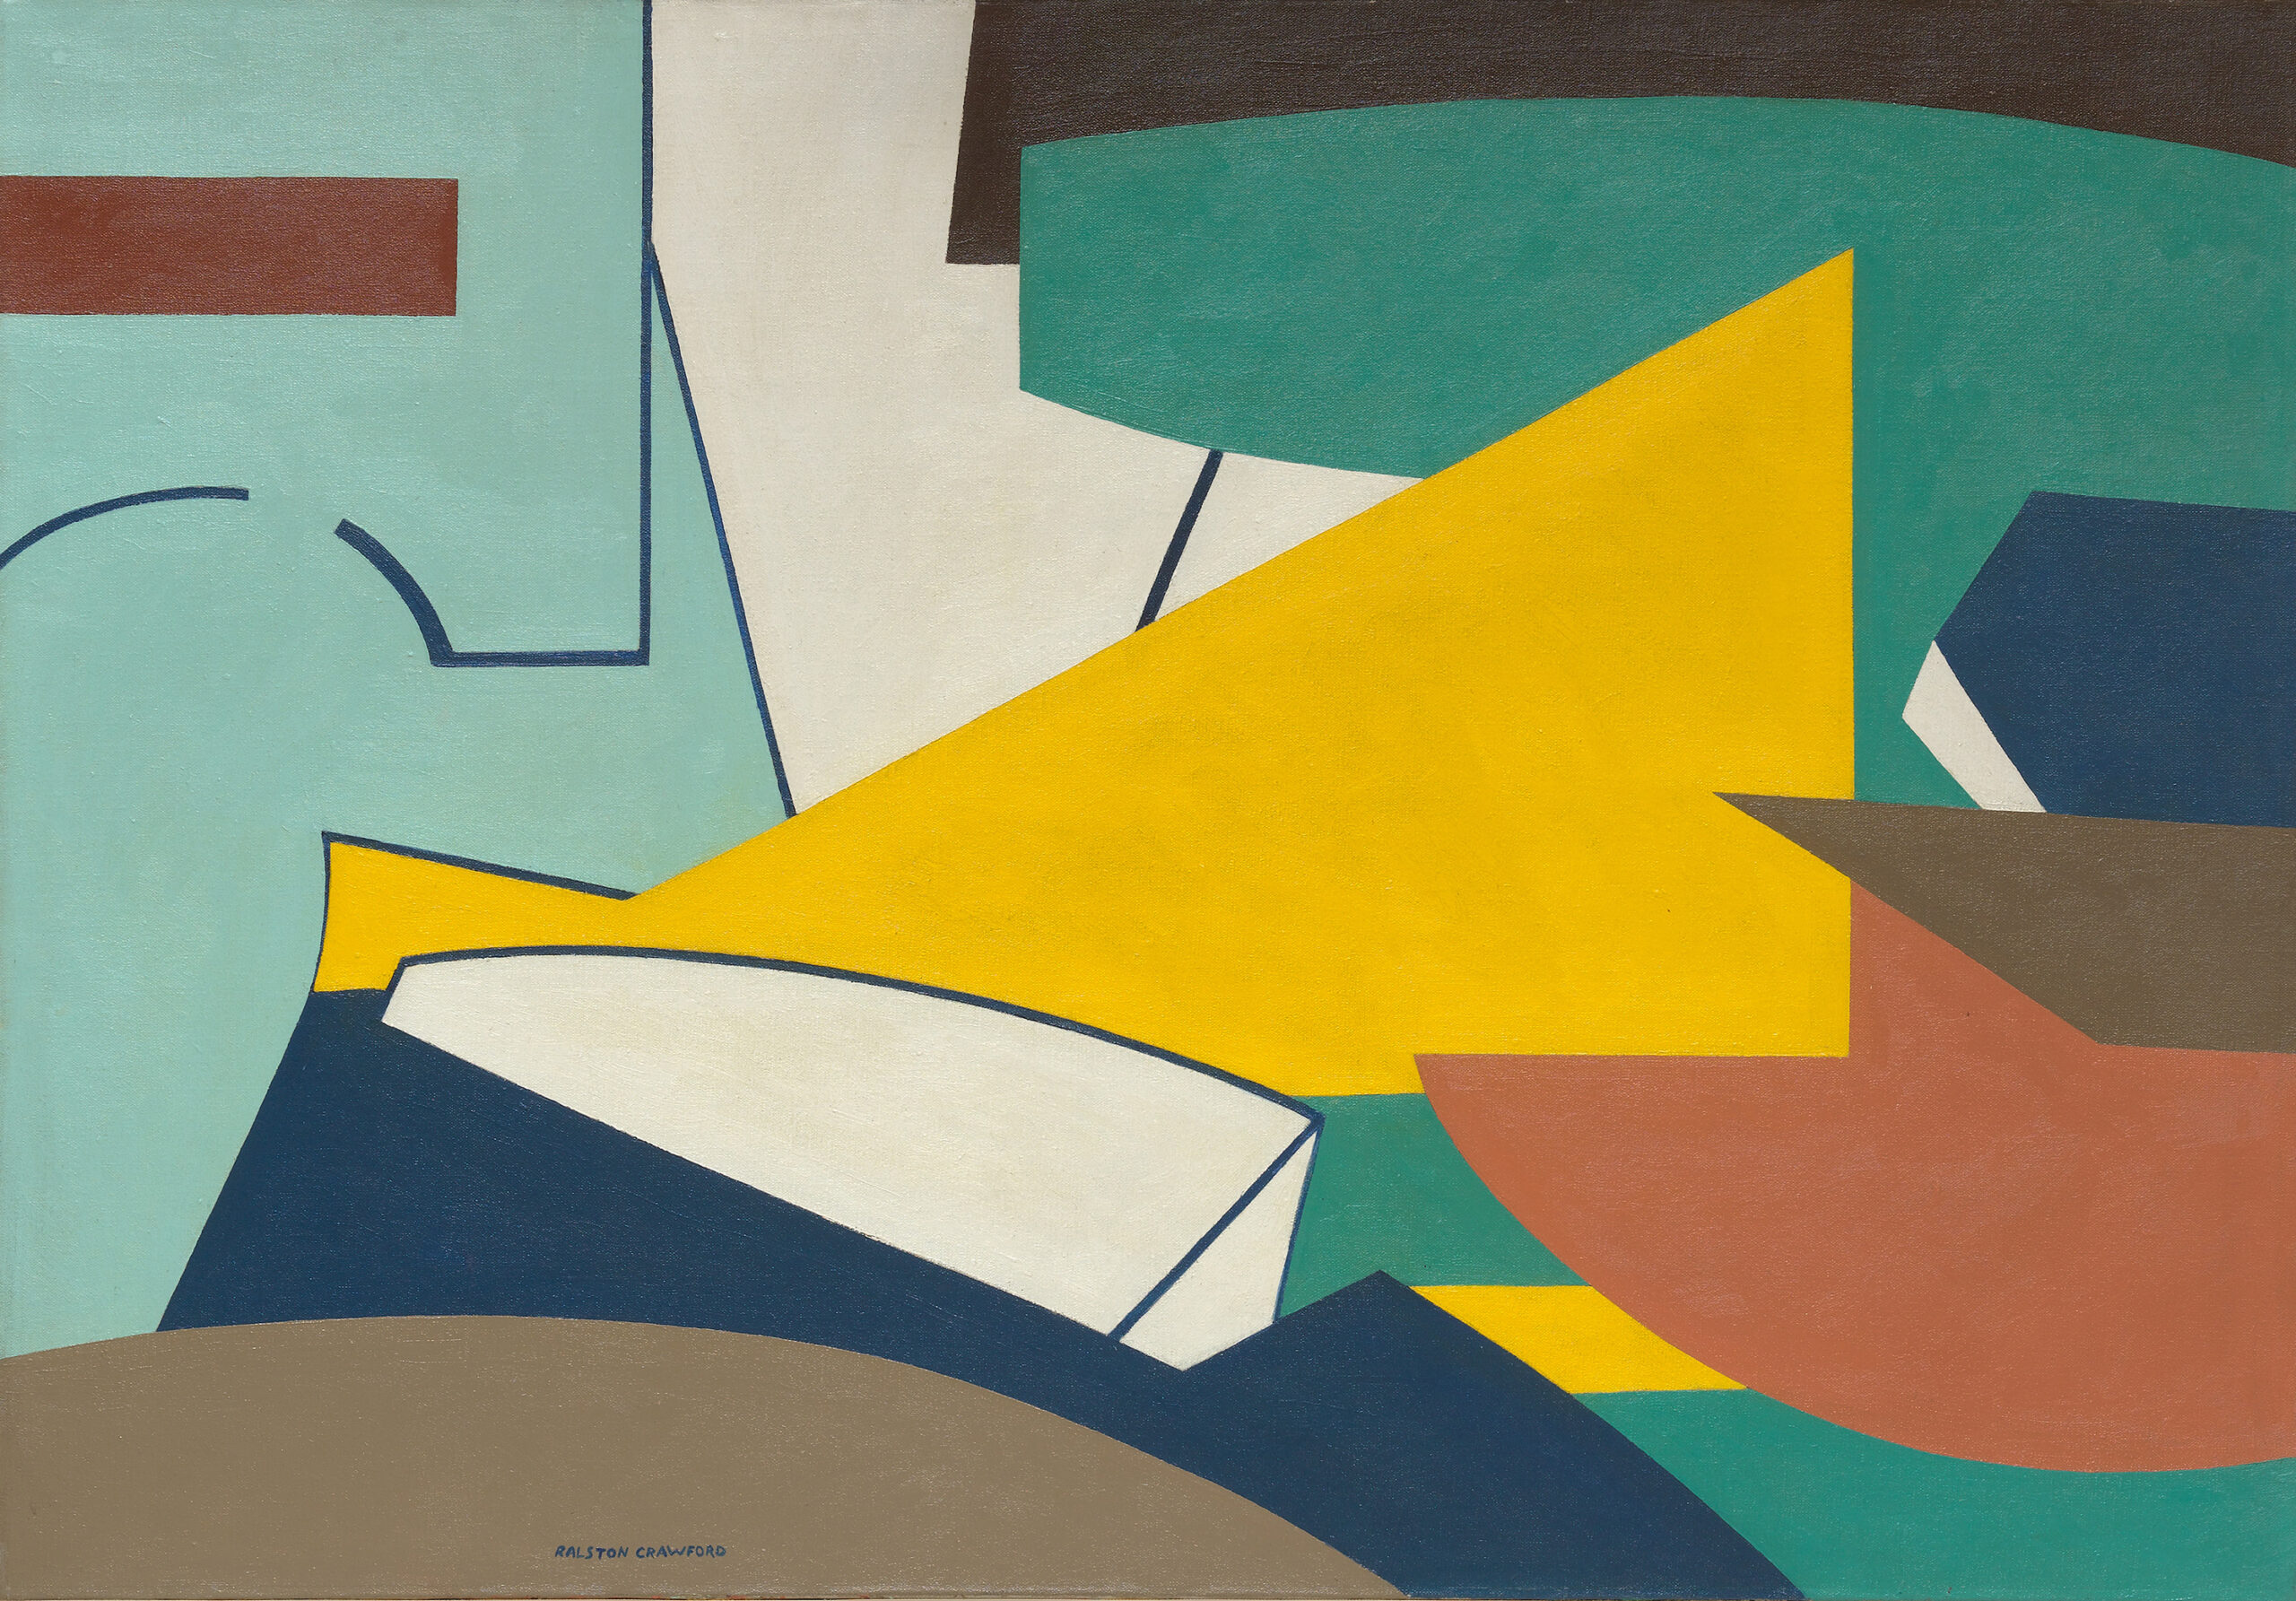 Abstracted view of an aircraft factory with curved shapes in teal, white, and brown floating in space and a yellow triangular shape at the center.